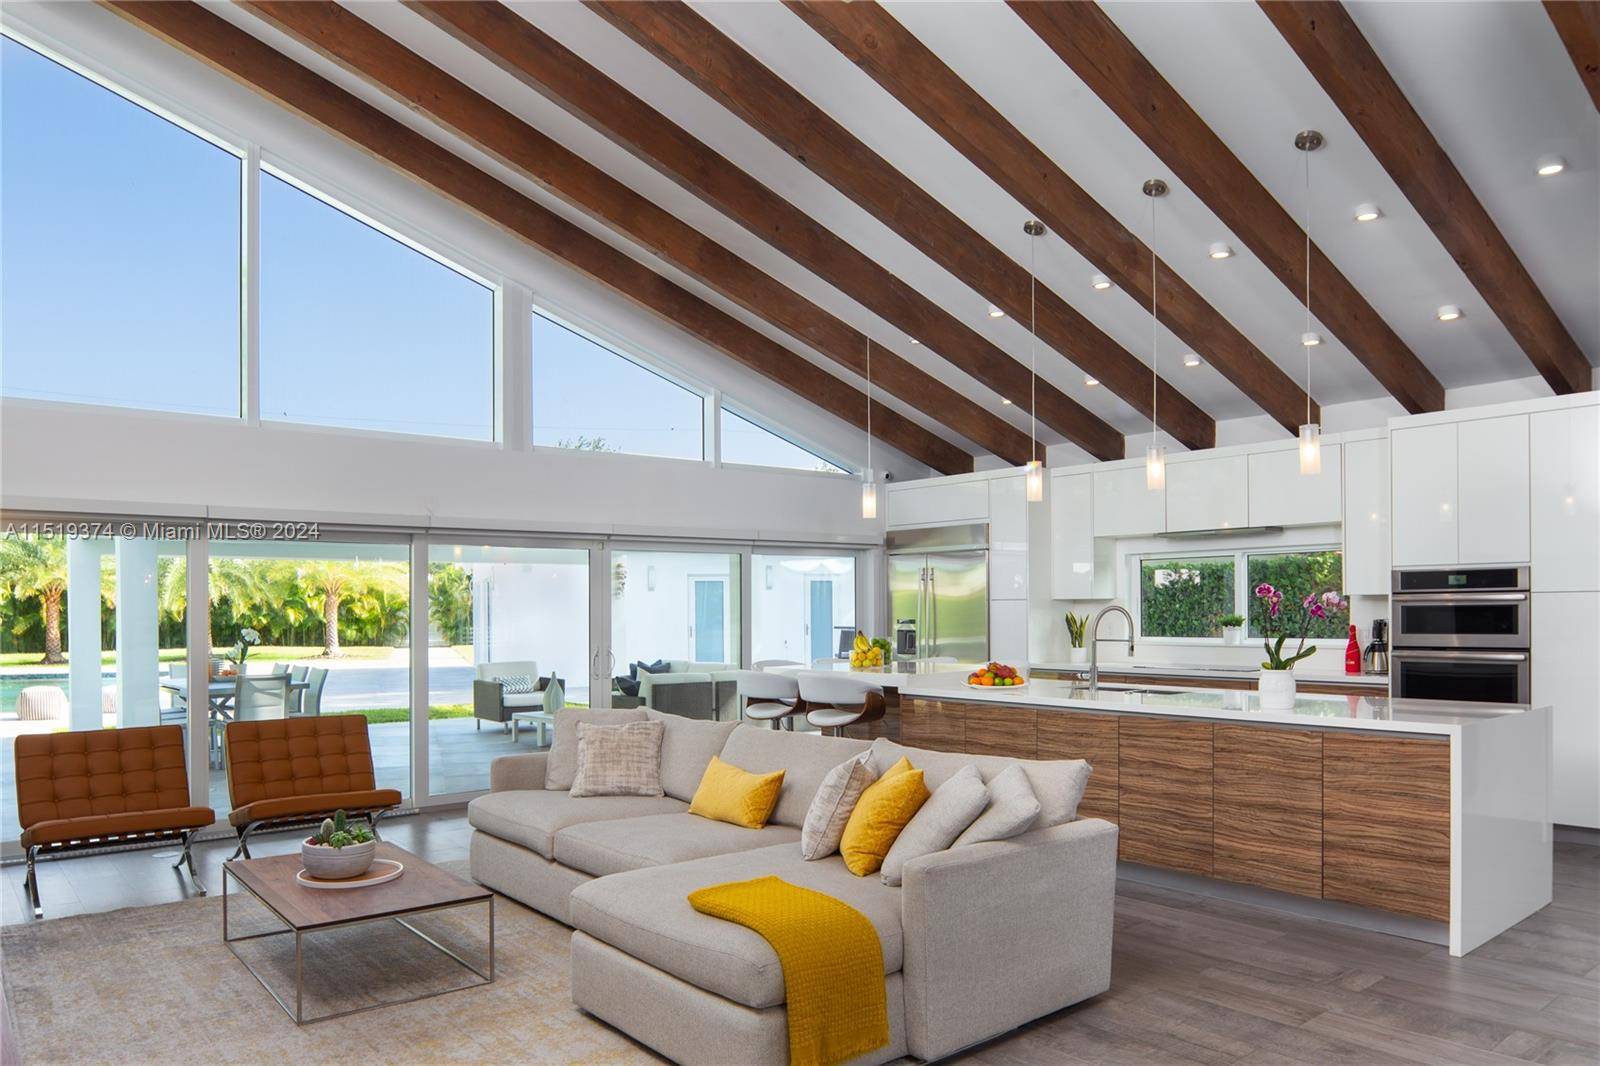 Miami Shores Midcentury Modern Style Oasis Situated on an a 23, 000 SqFt lot, this unique secluded expansive resort style home boasts an outdoor kitchen bar, independent fully equipped cabana ...